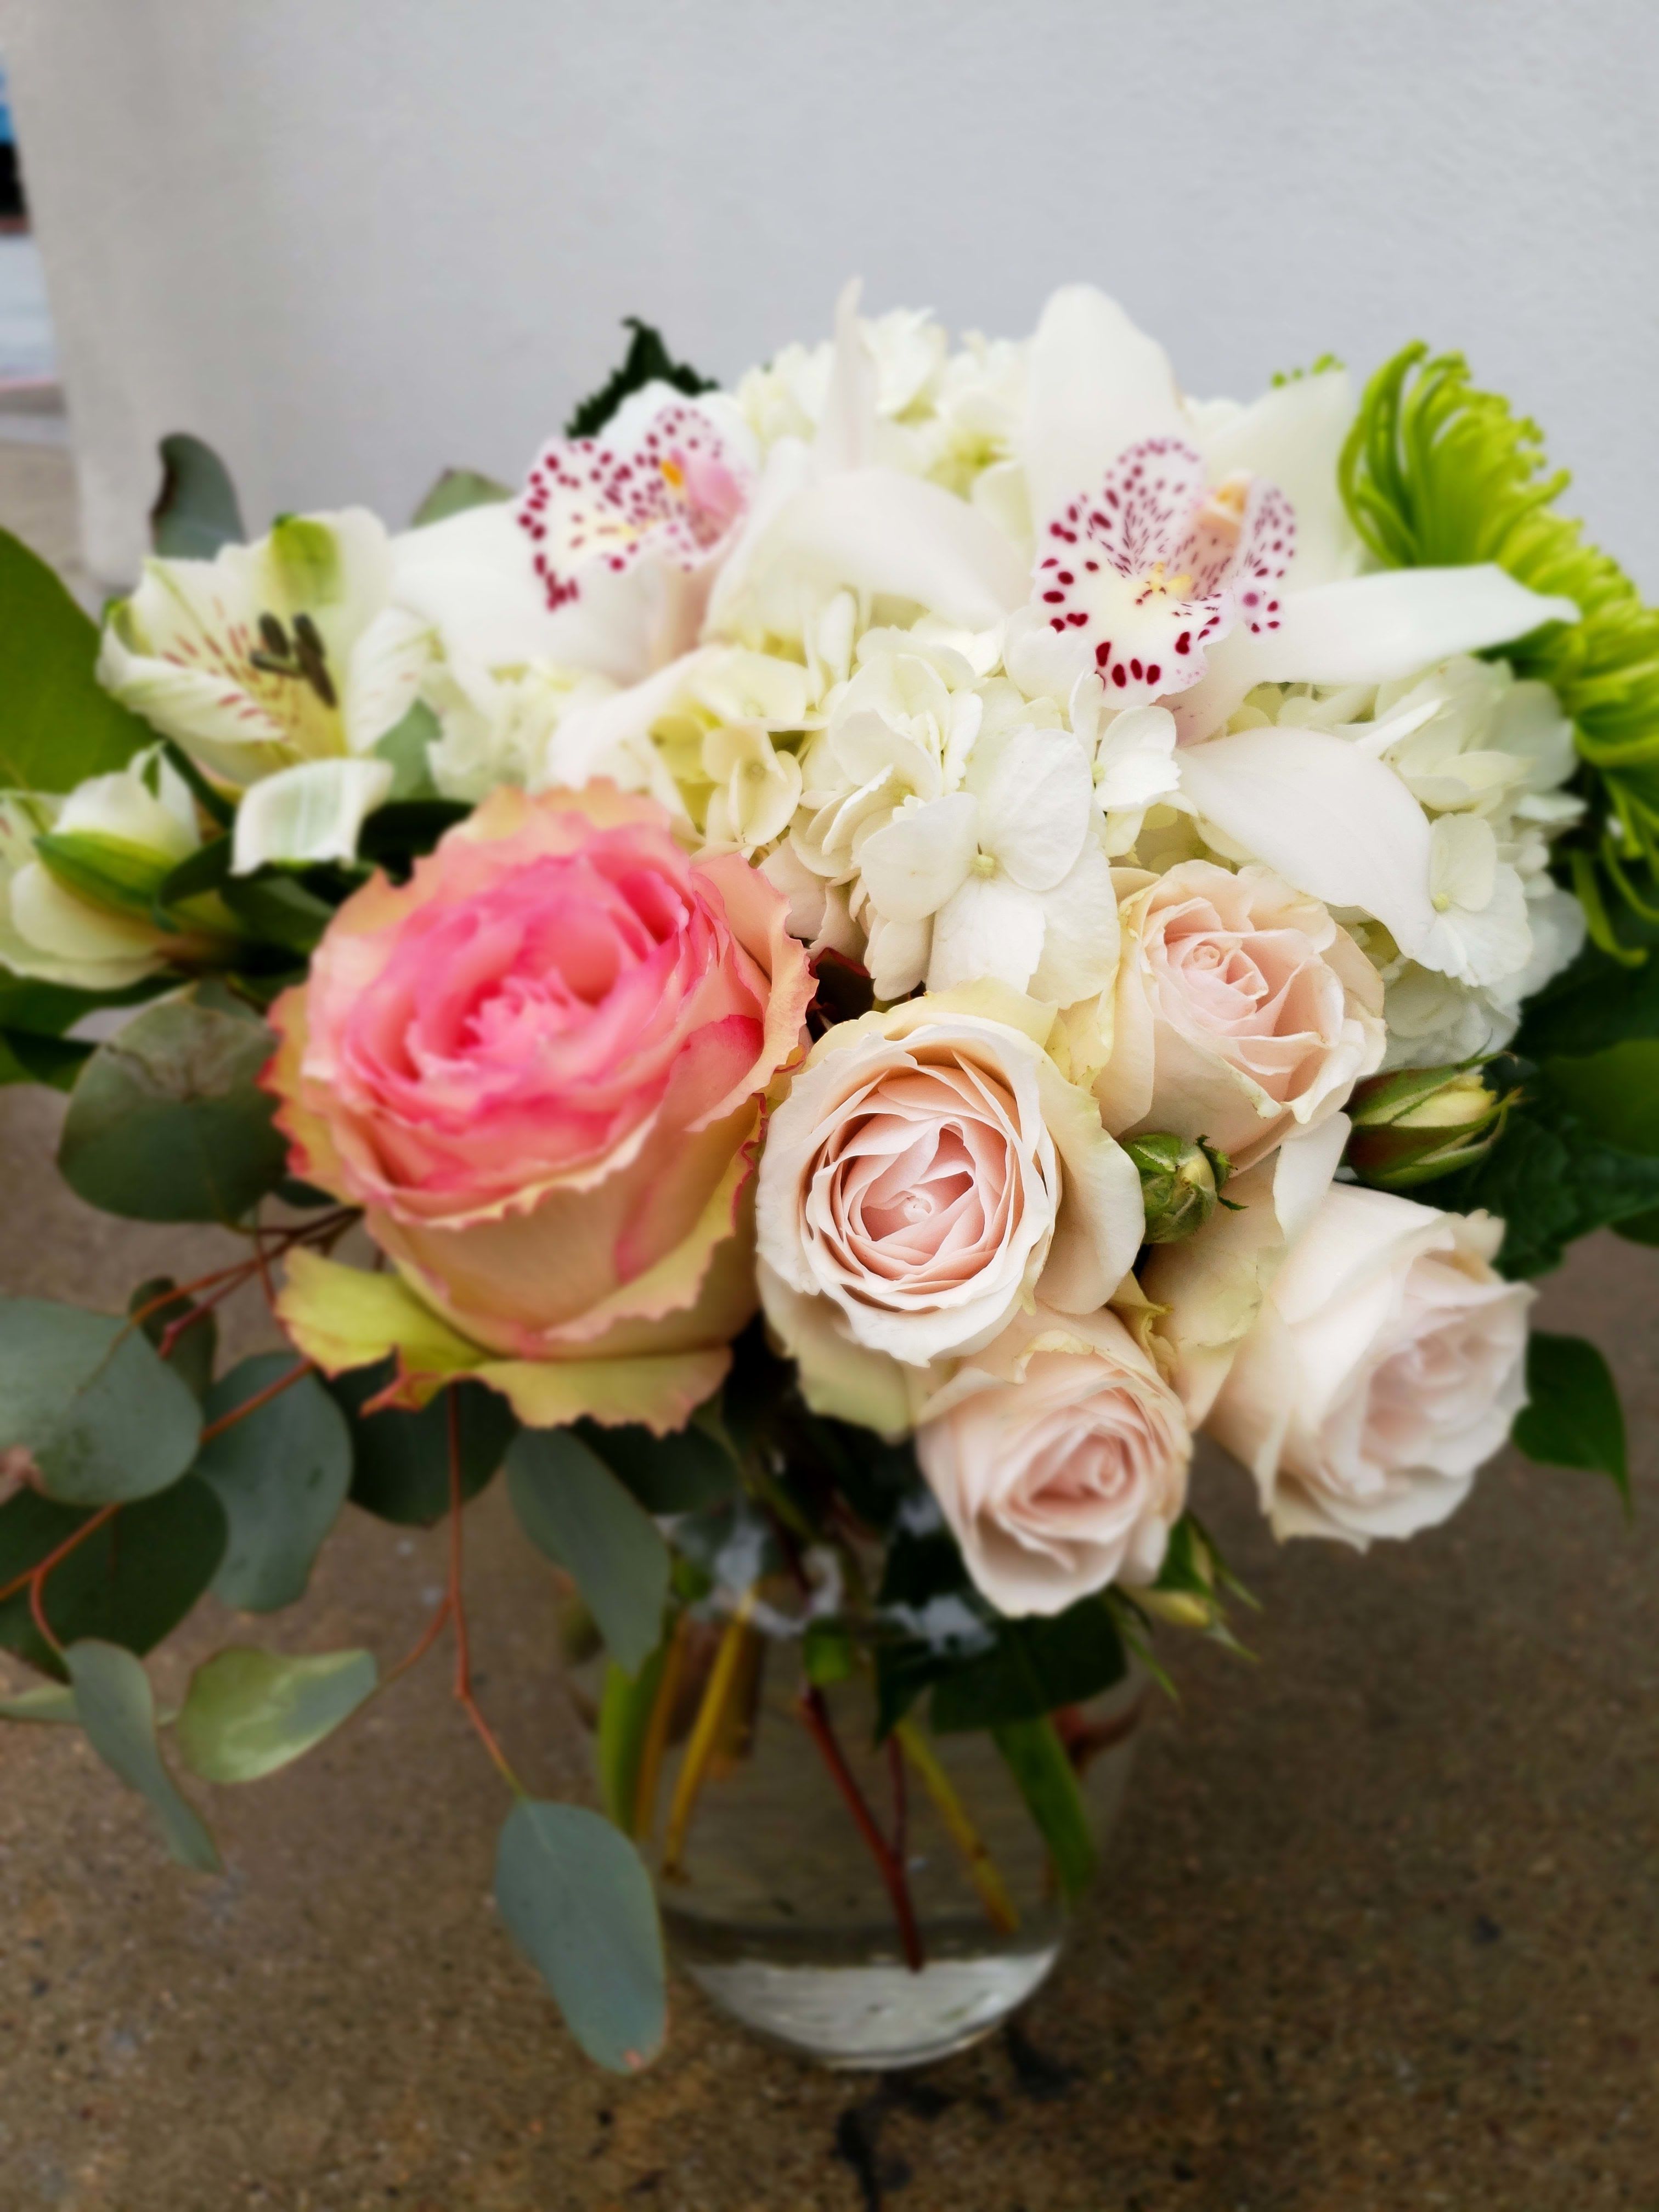 San Diego Florist | Flower Delivery by Point Loma Village Florist